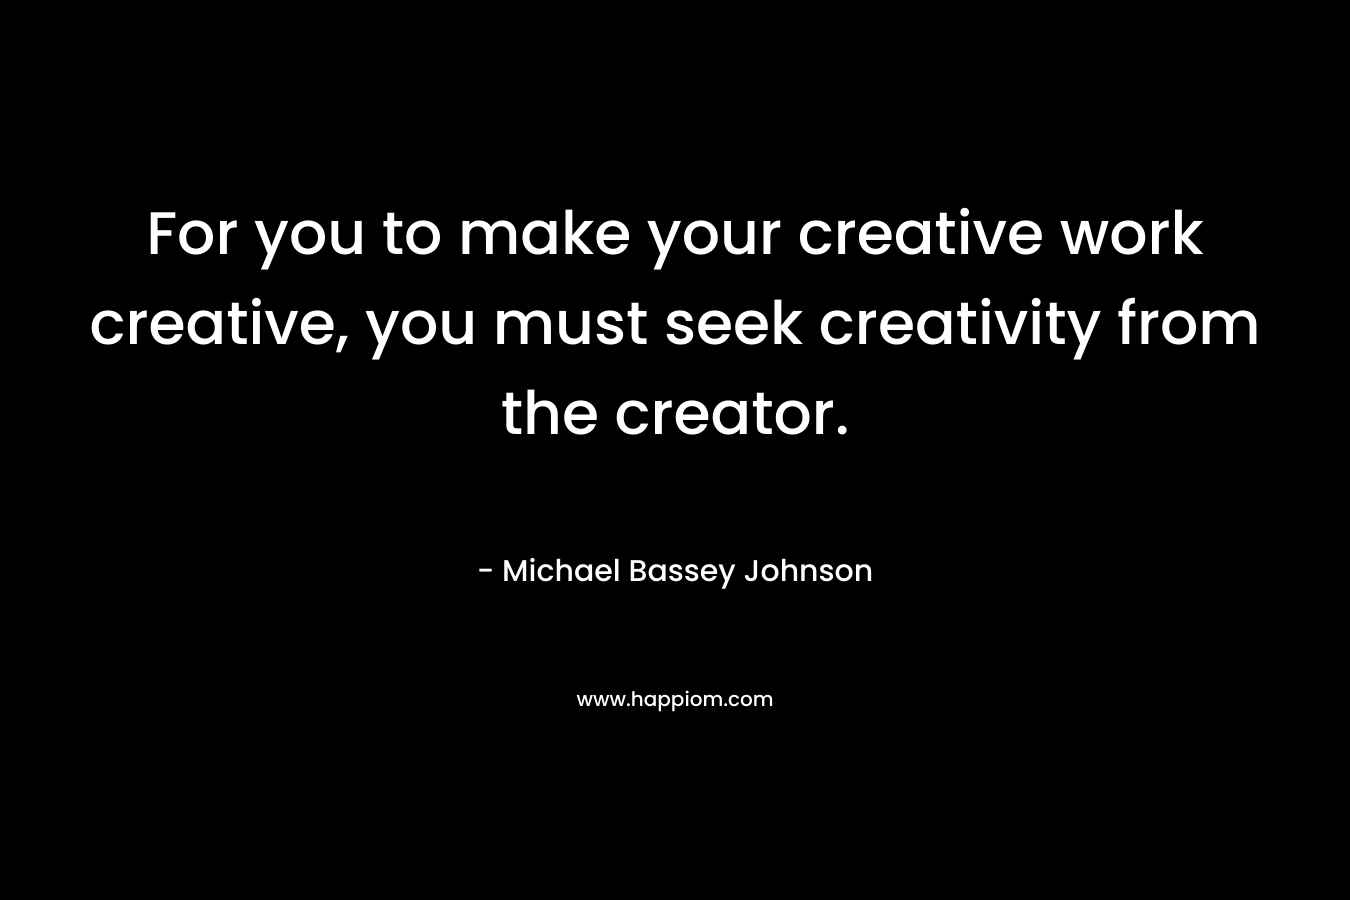 For you to make your creative work creative, you must seek creativity from the creator.